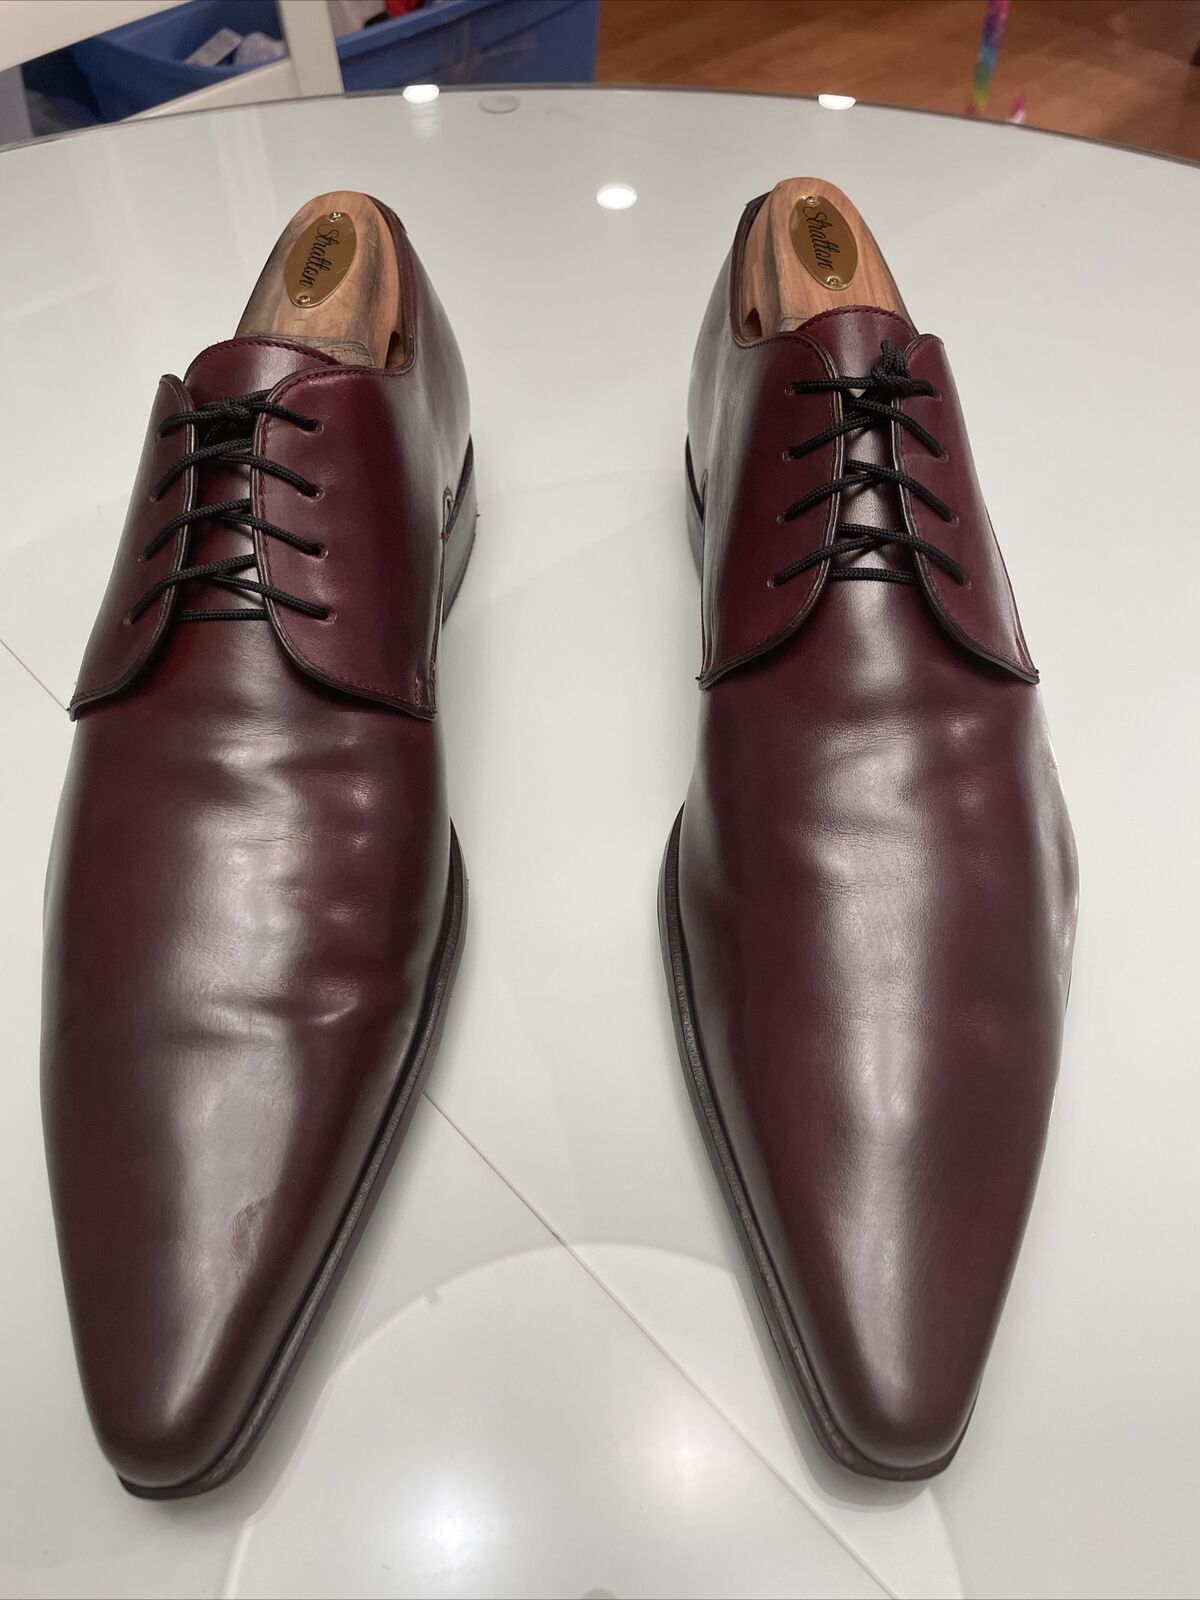 Dolce & Gabbana Burgundy Mens Dress Shoes Pre-Owned with New Heel Pads Size 8.5